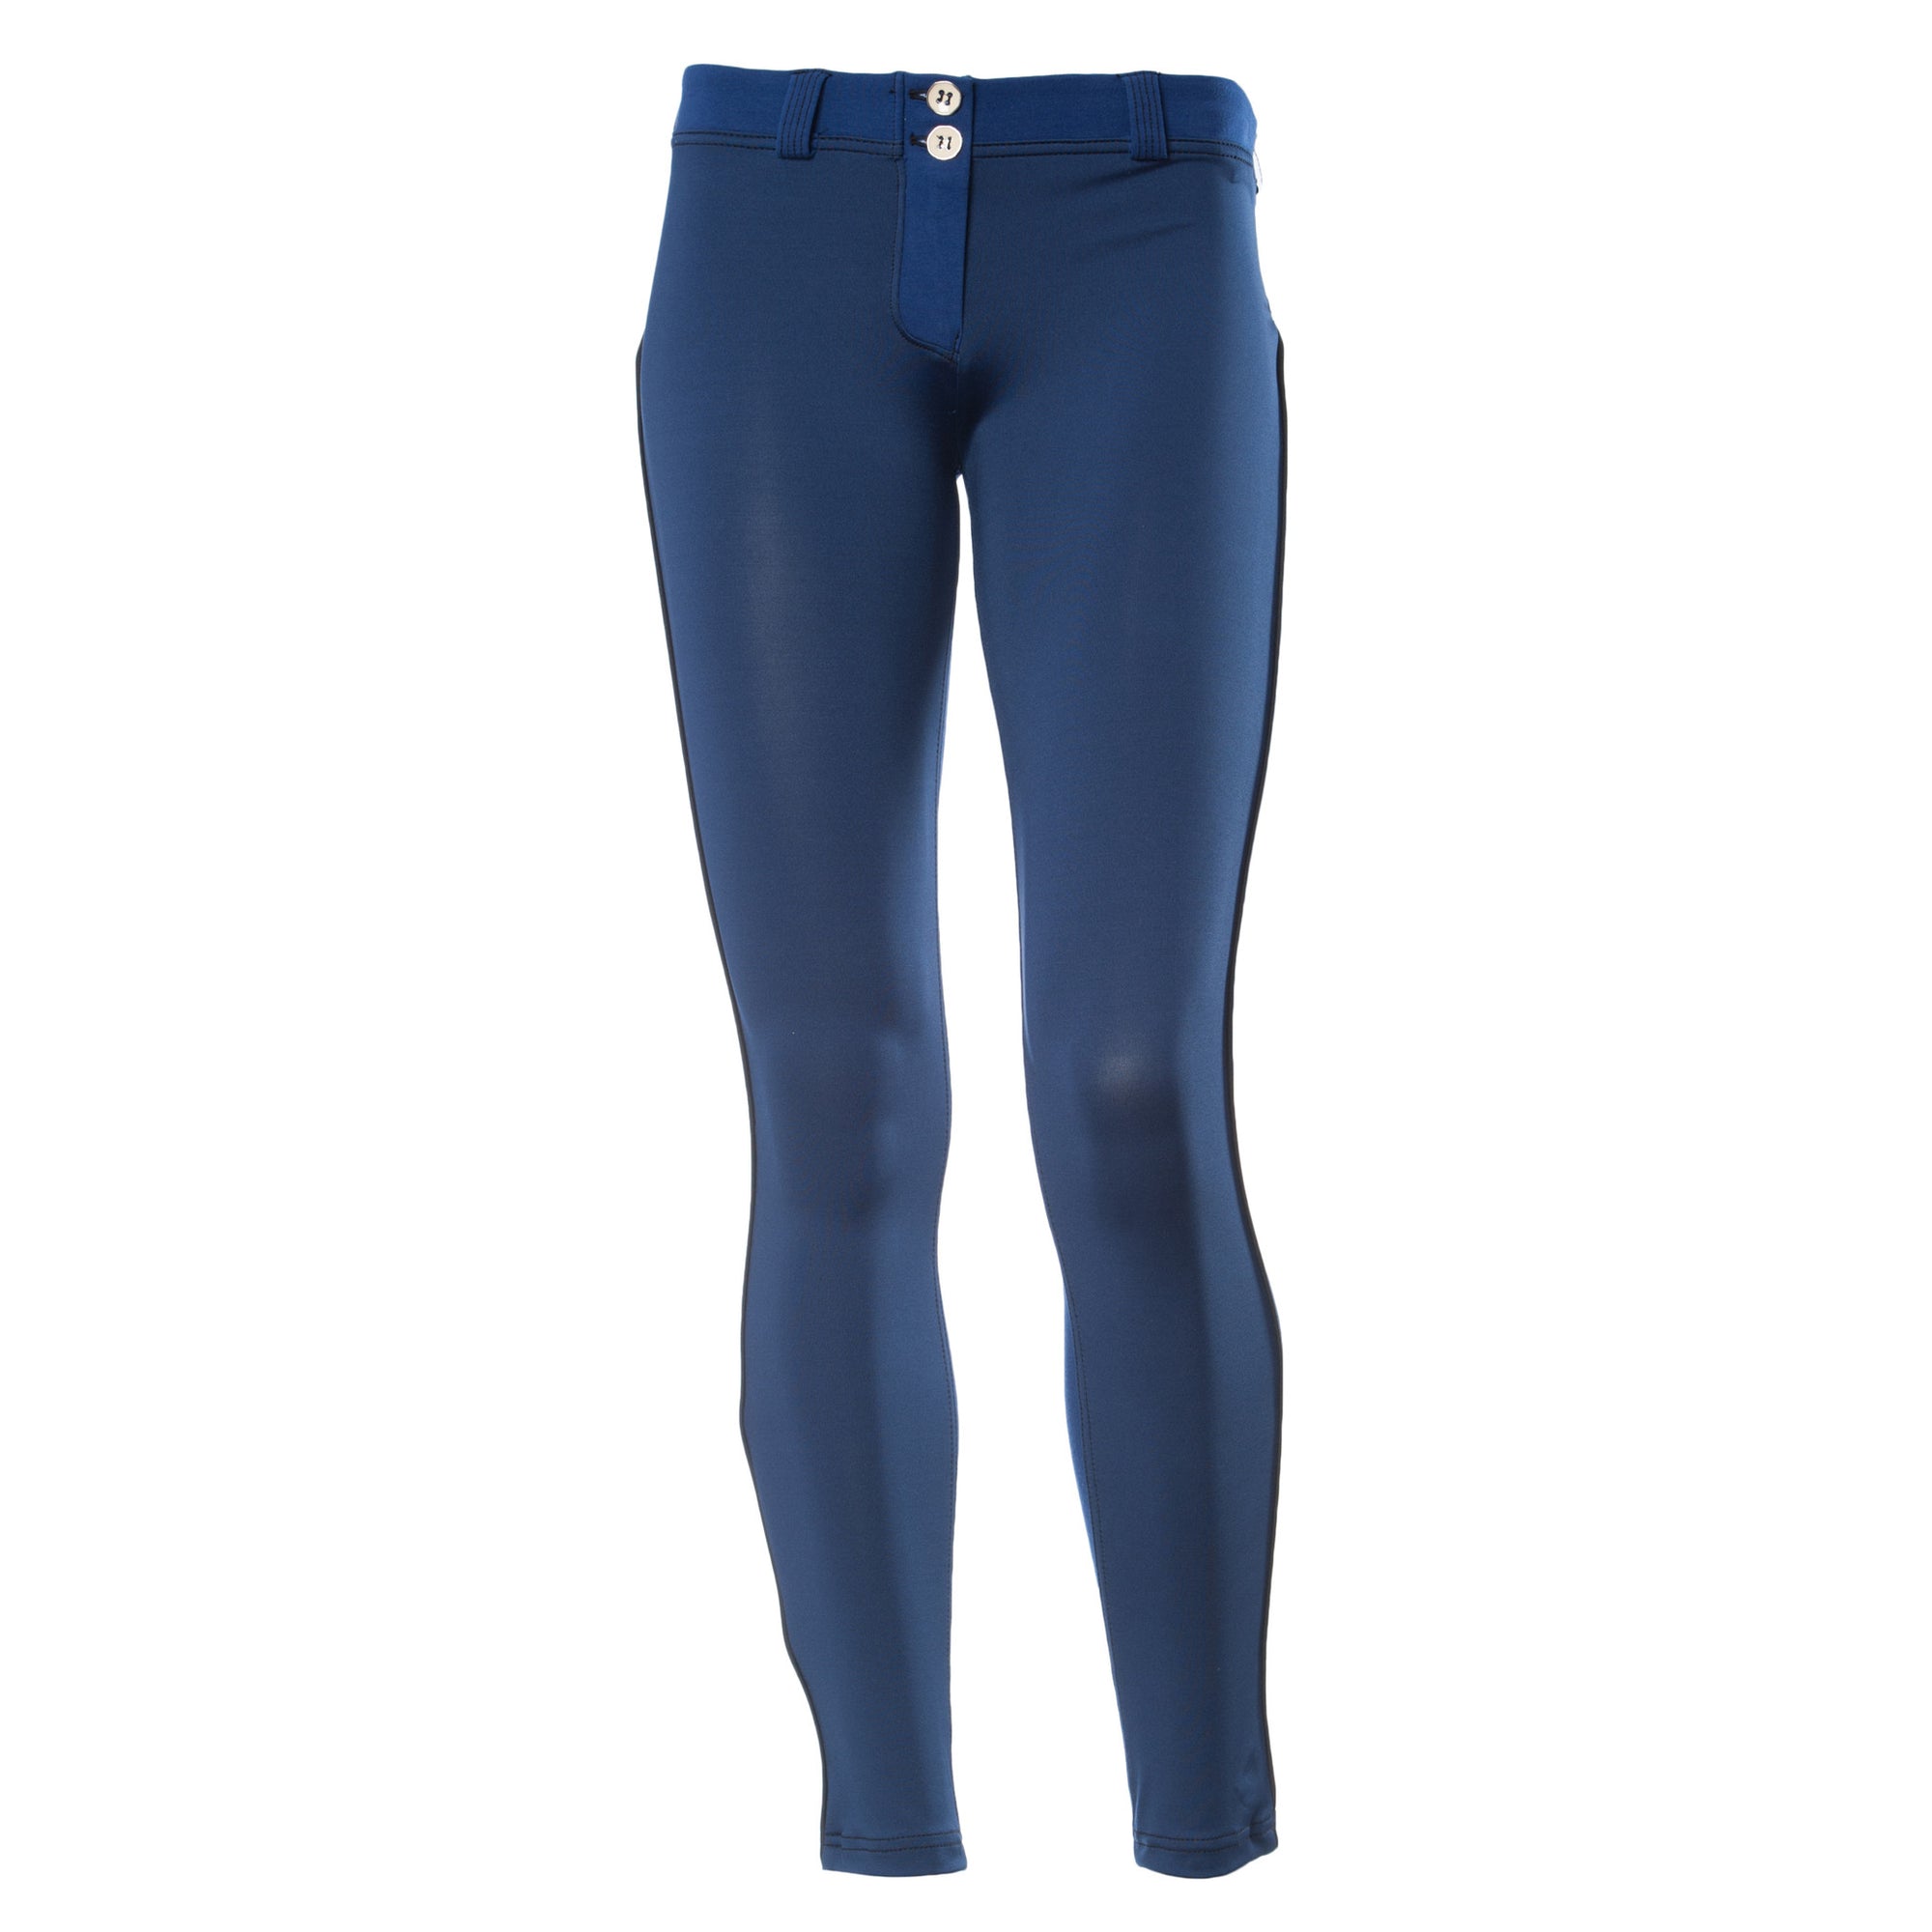 FREDDY WR.UP 7/8 ZIP ANKLE PIPING PANT - Blue - LIVIFY
 - 2